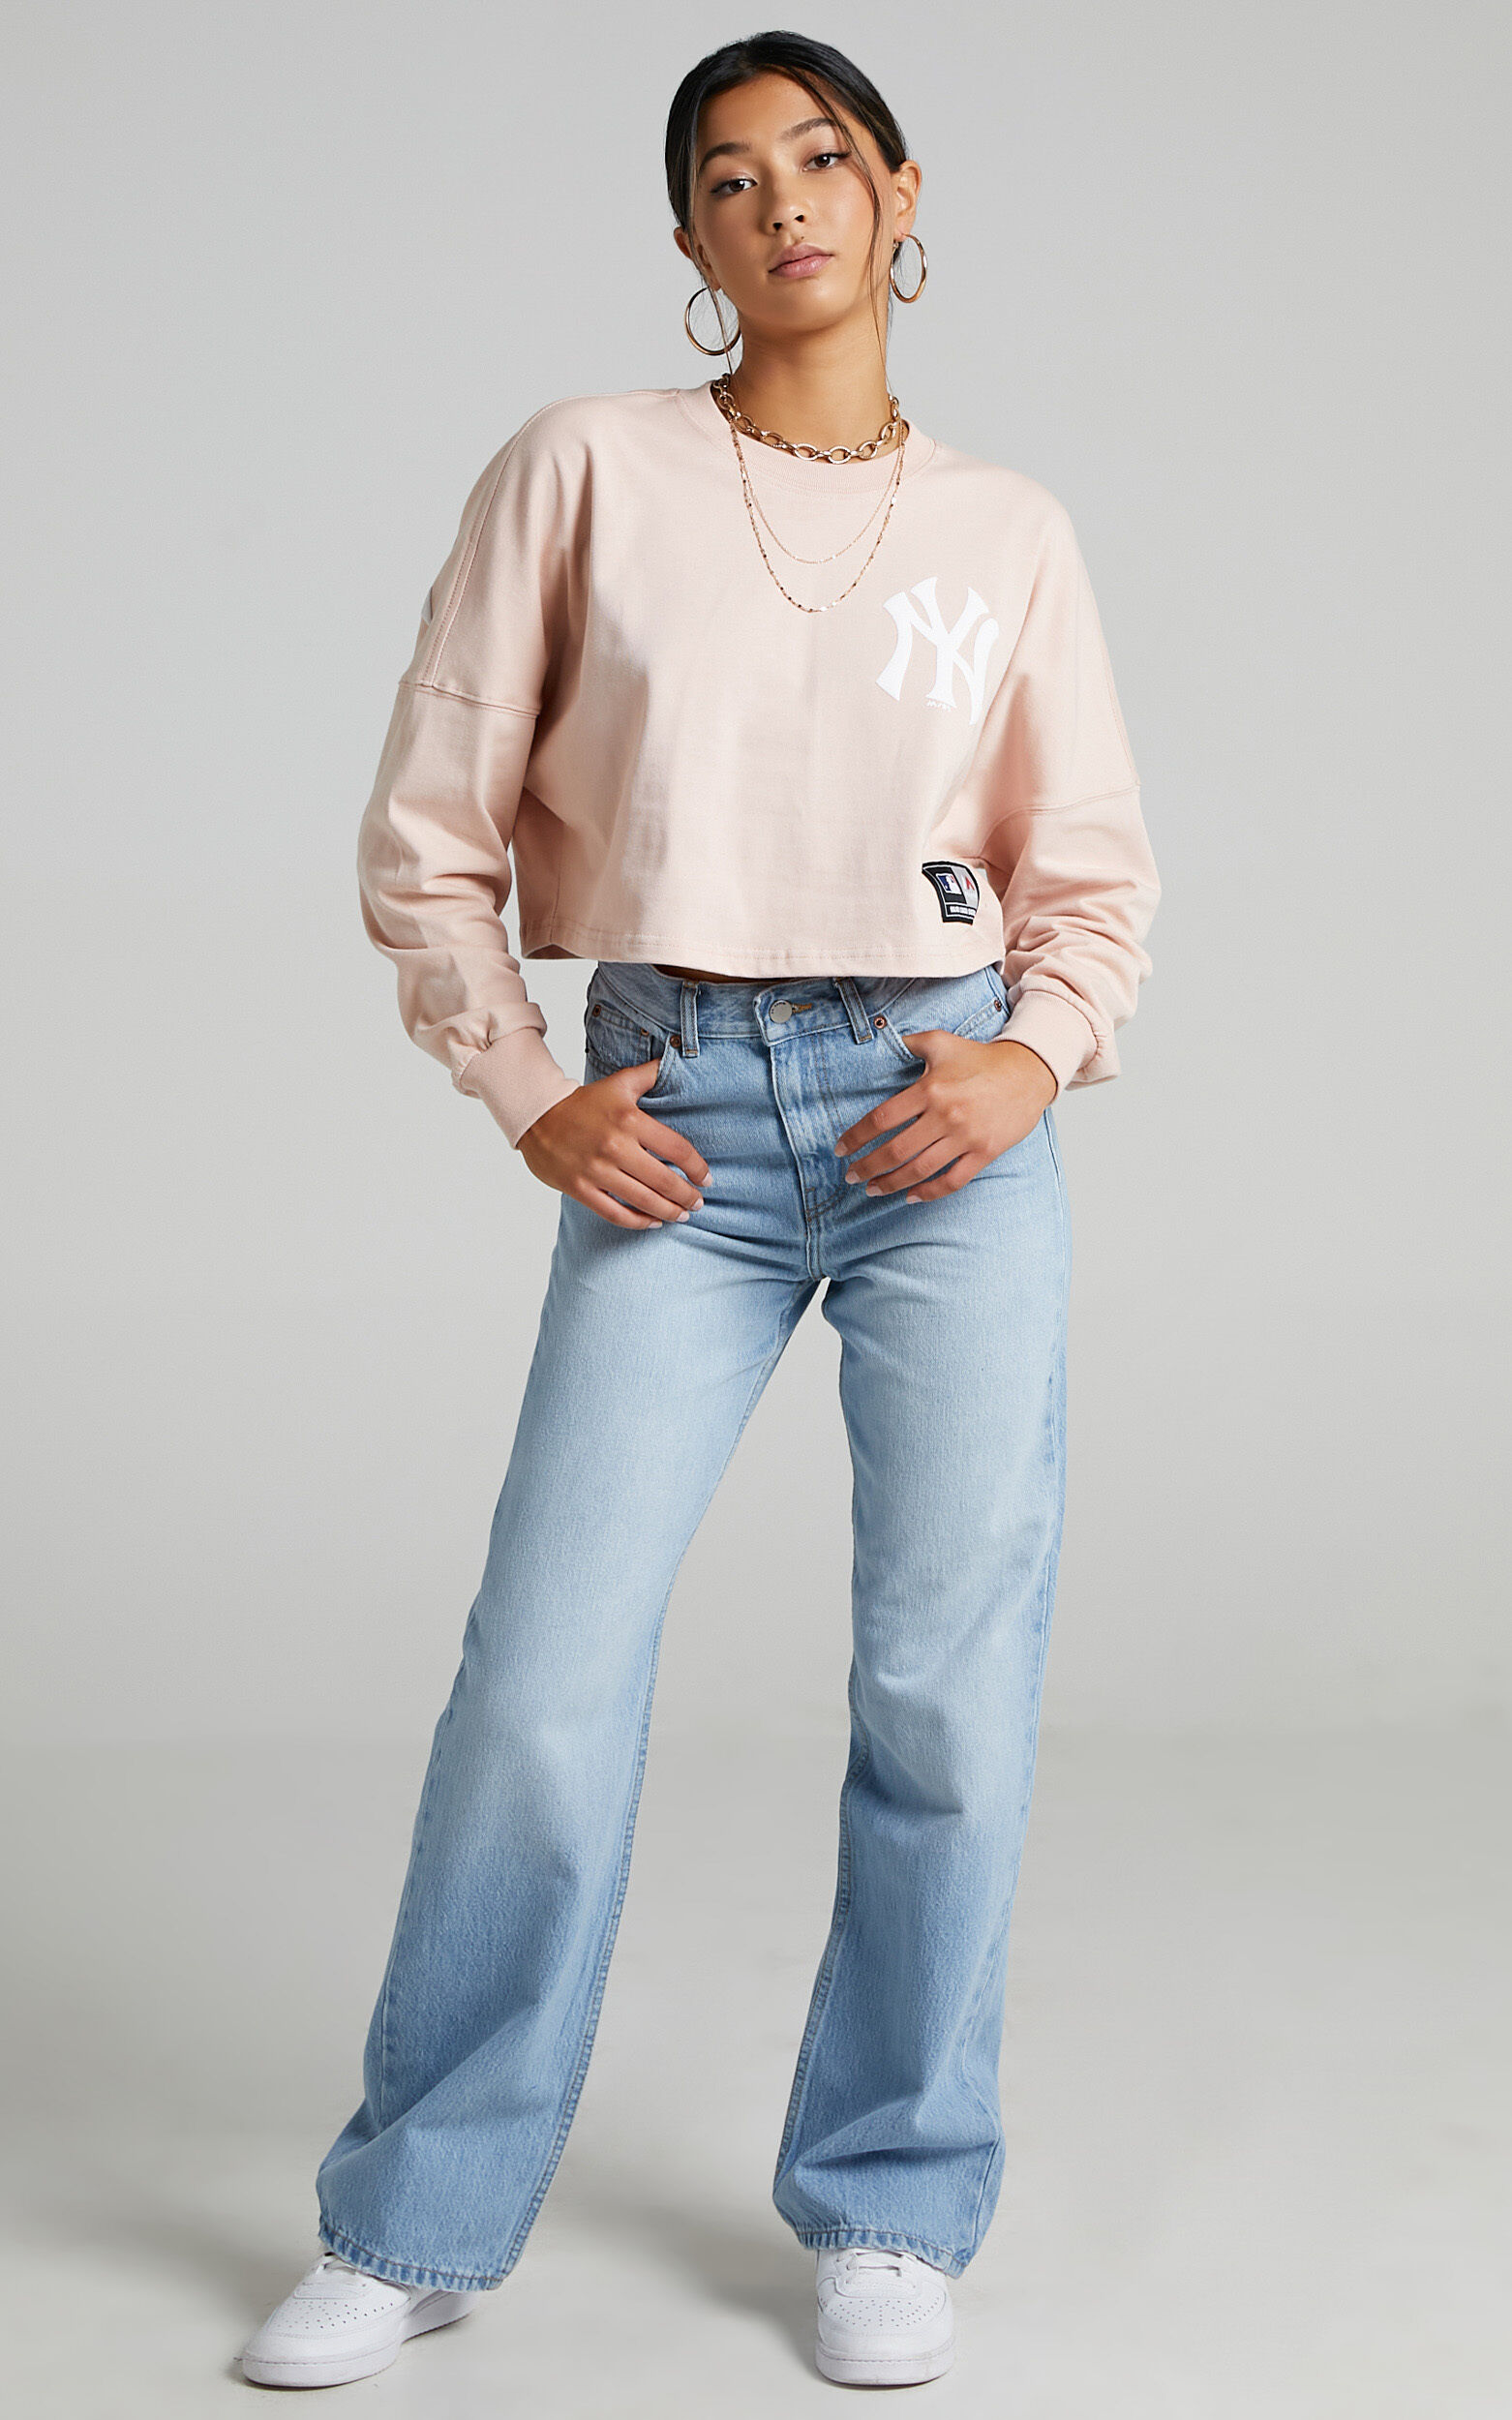 Majestic - NY Yankees Cropped Rando LS Tee in Peach - L, ORG1, super-hi-res image number null